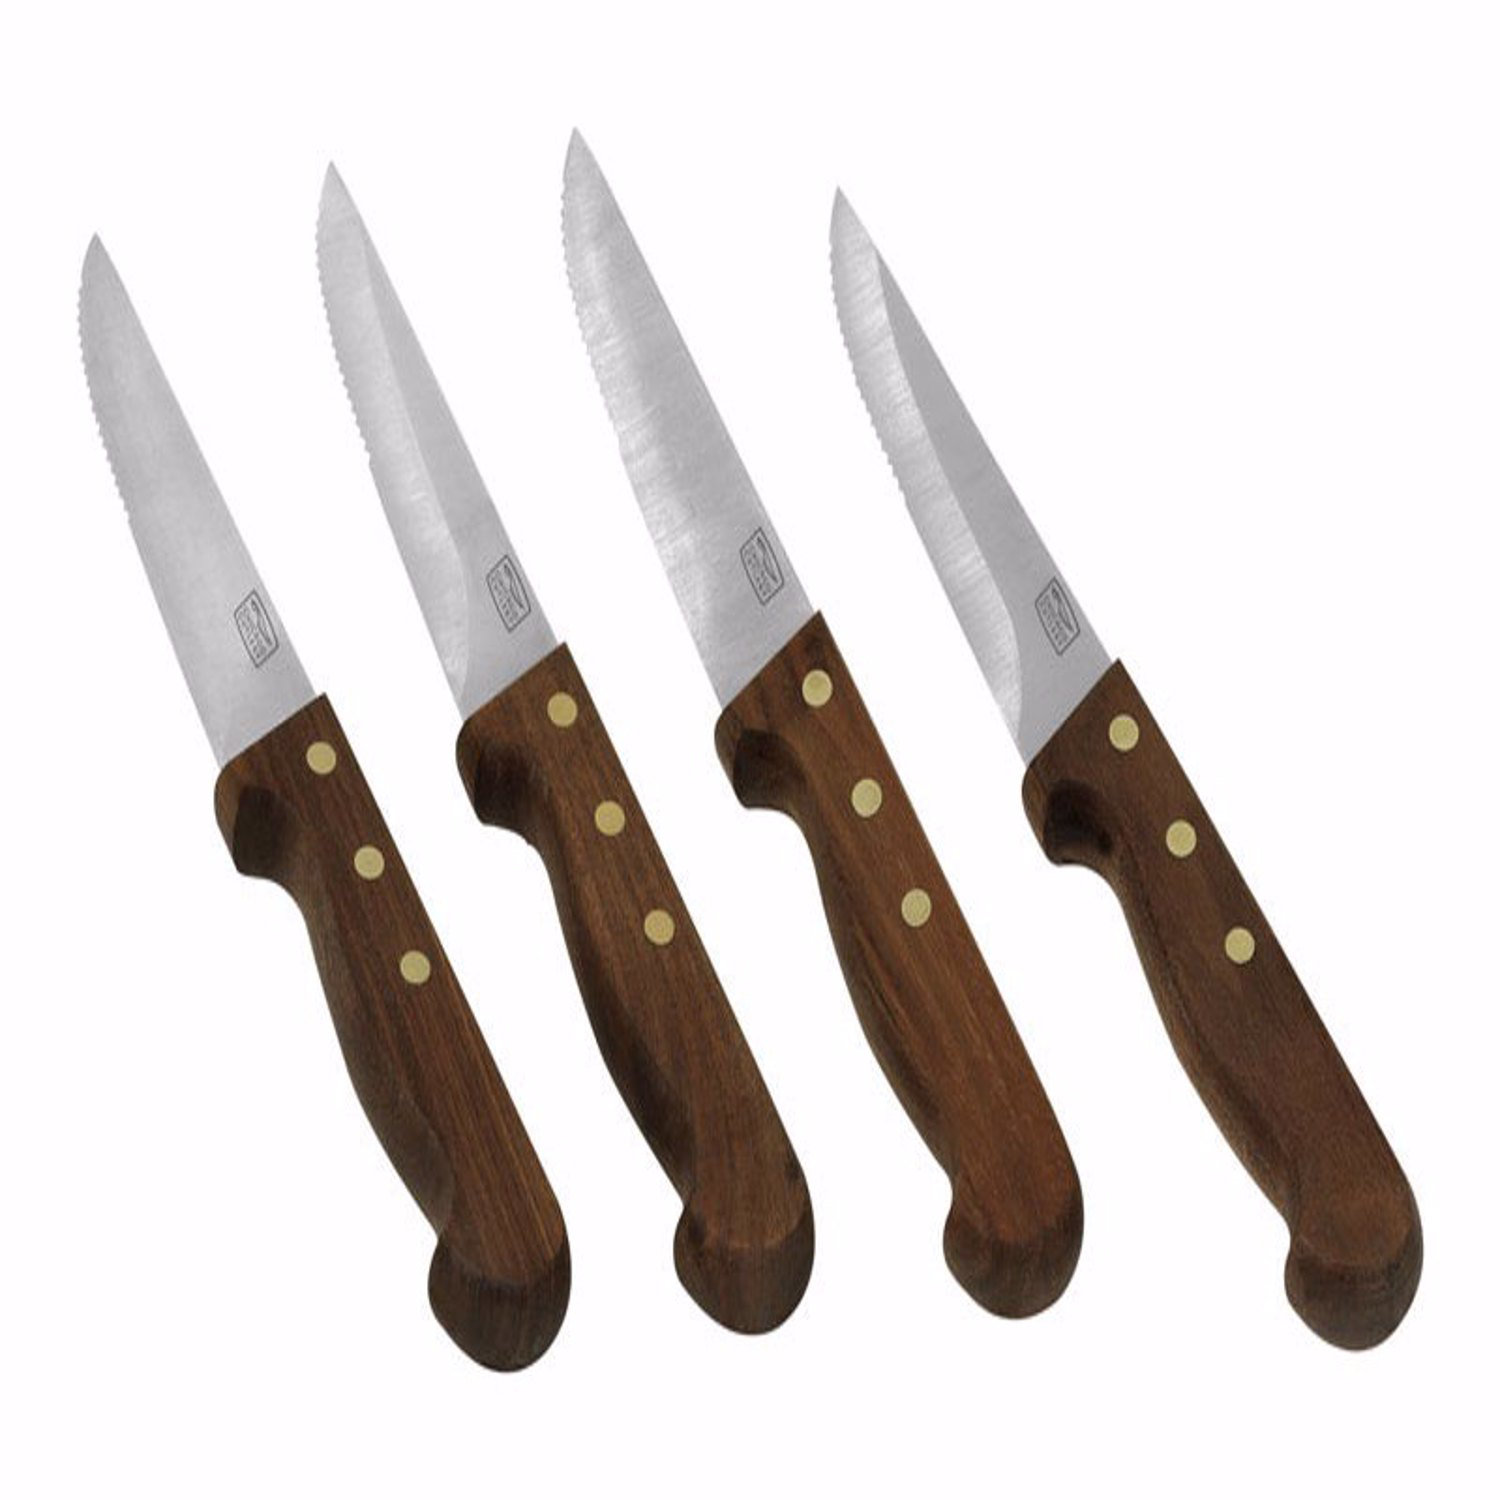 Chicago Cutlery 4 Piece Stainless Steel Steak Knife Set & Reviews